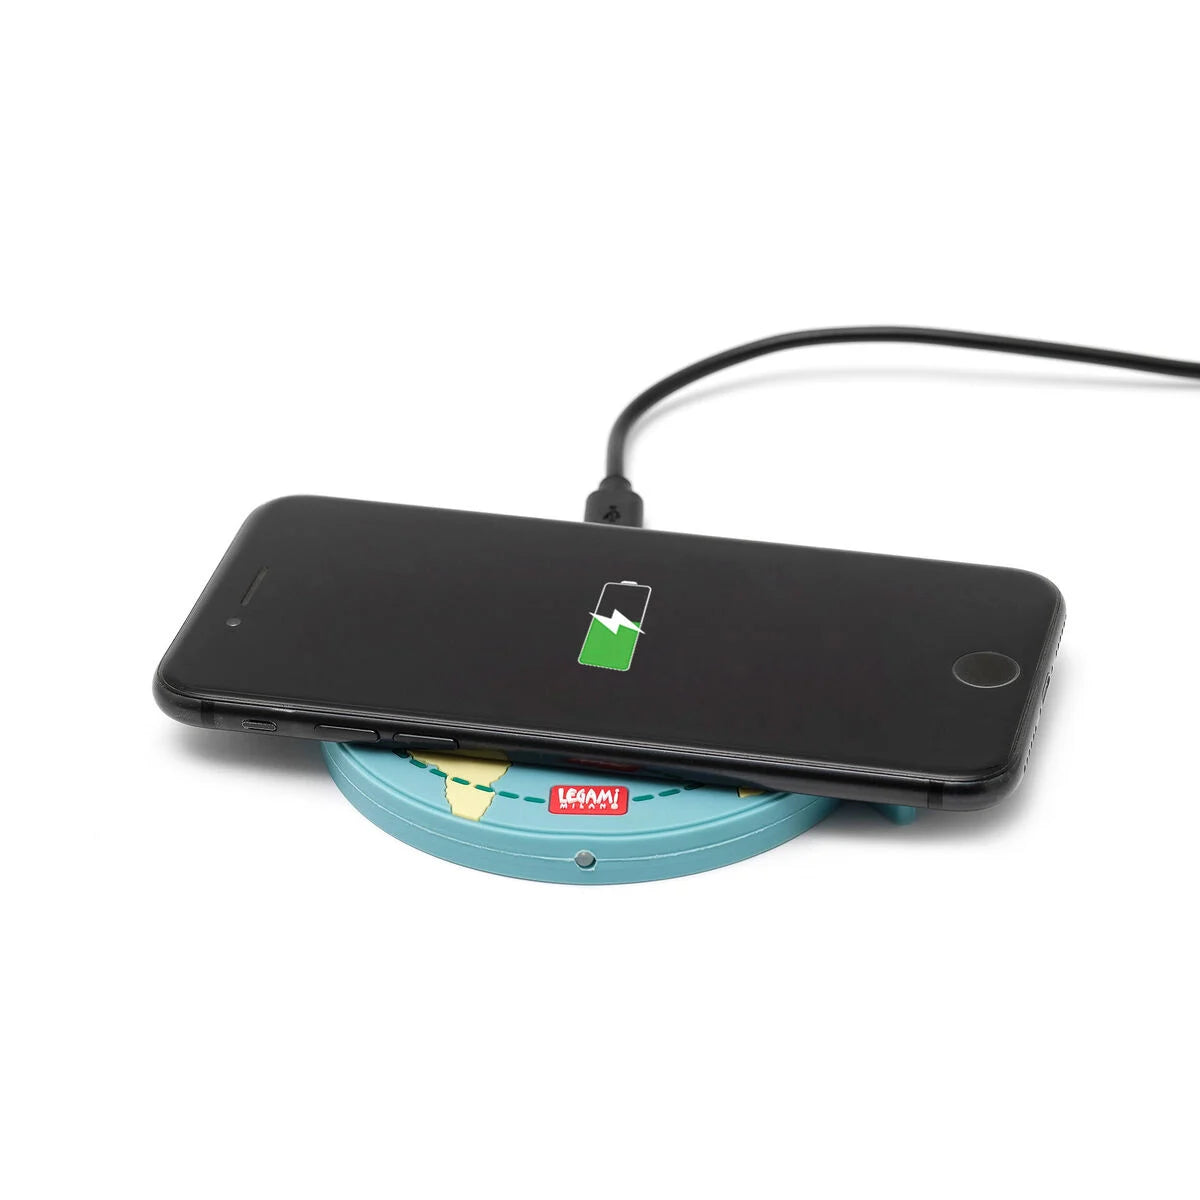 Fab Gifts | Legami Superfast Wireless Charger Blue by Weirs of Baggot Street